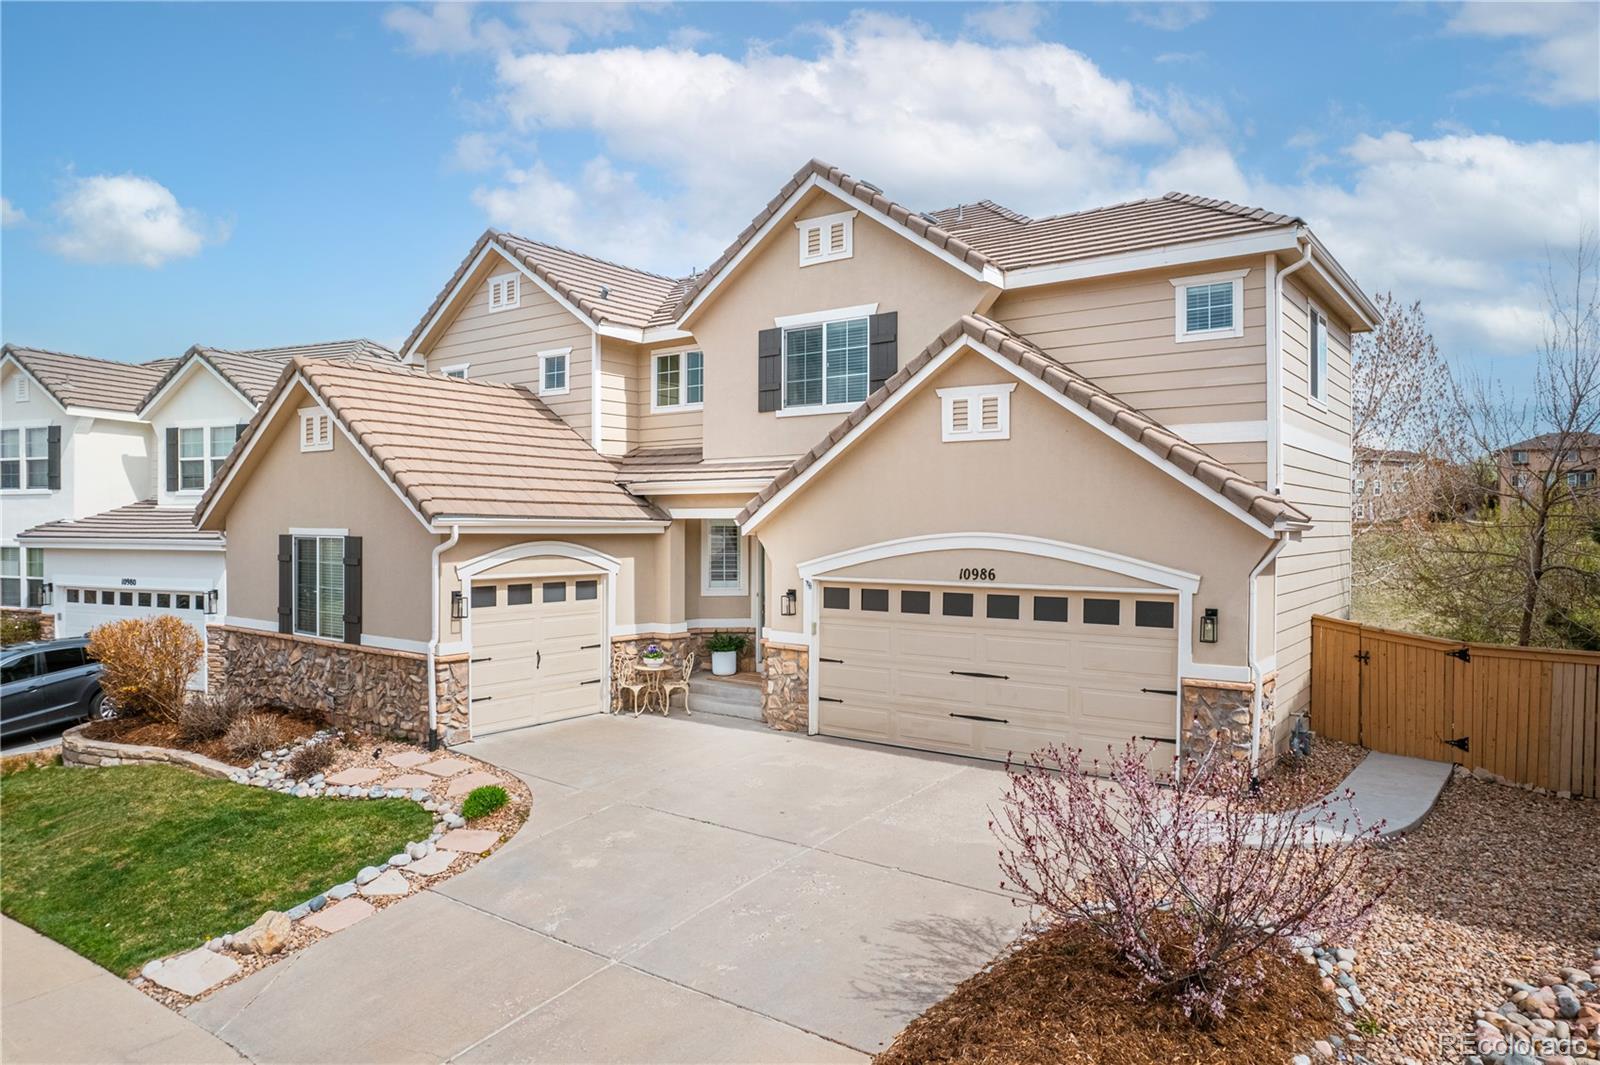 Photo of 10986 Bellbrook Circle, Highlands Ranch, CO 80130